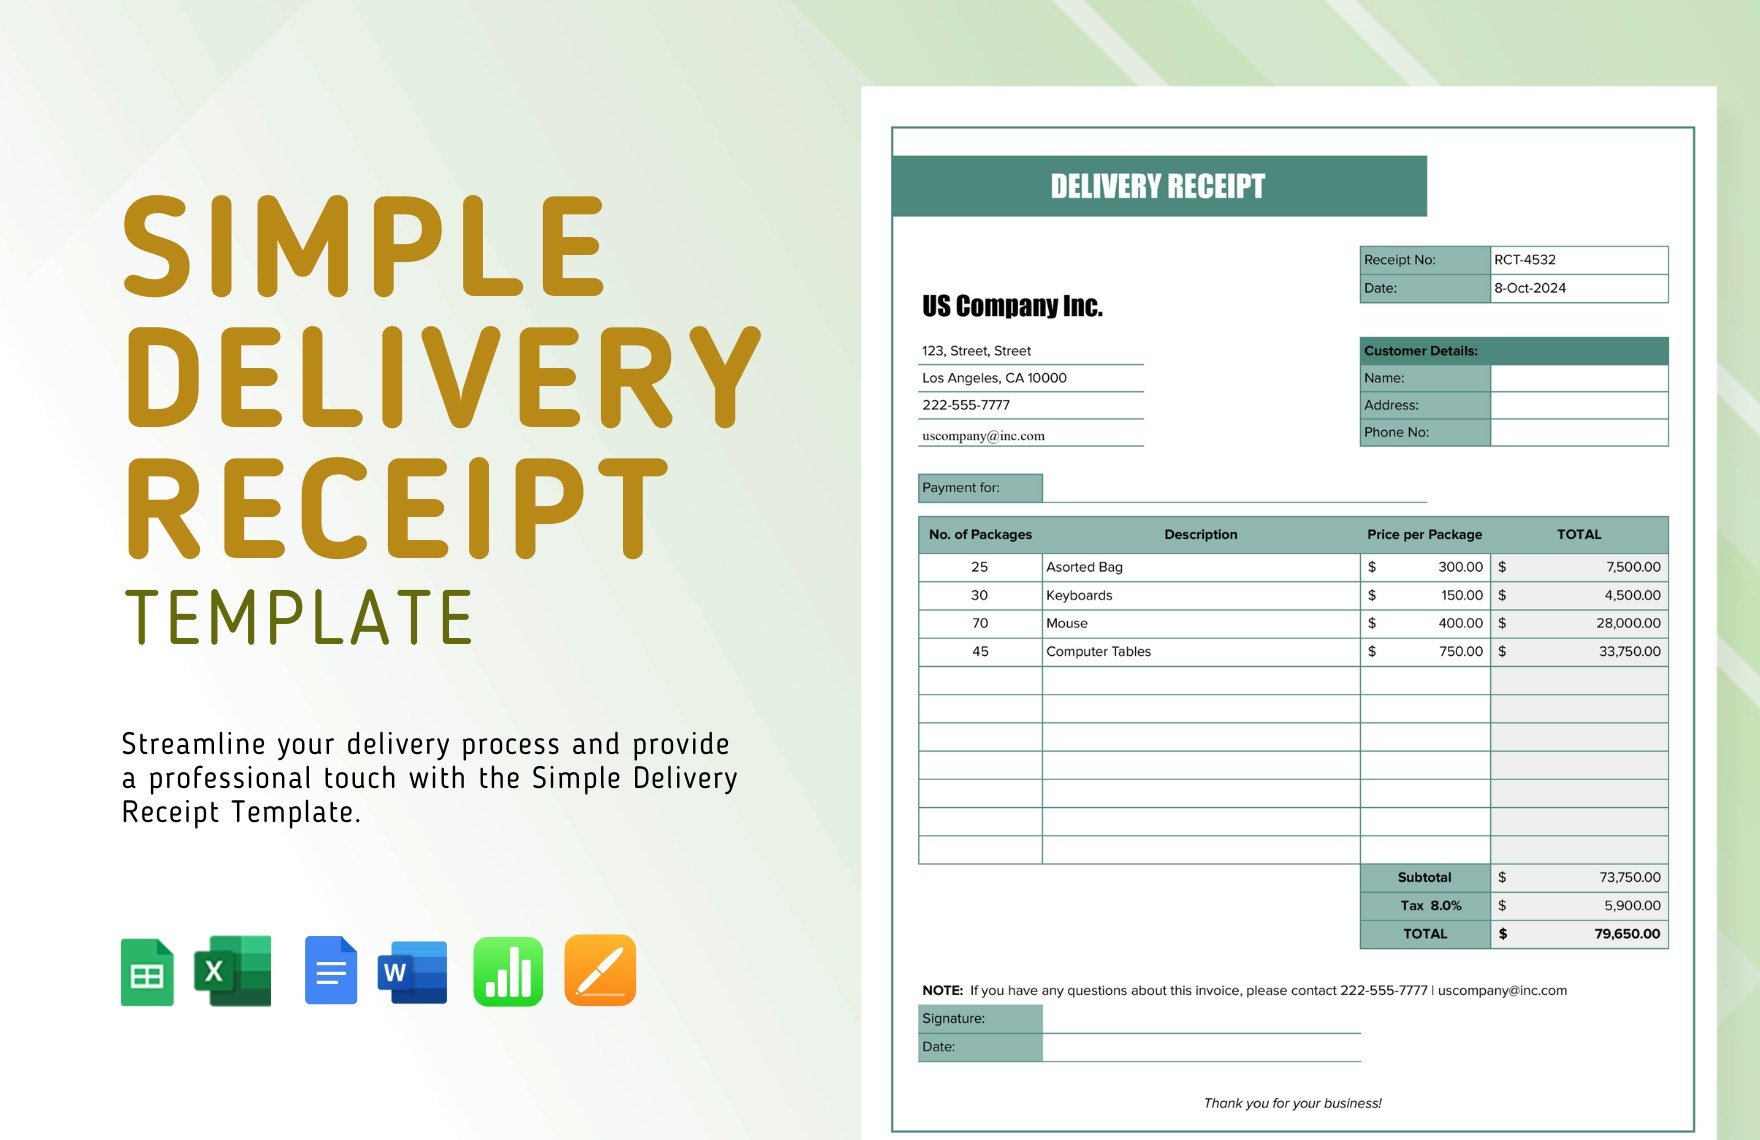 Simple Delivery Receipt Template in Word, Google Docs, Excel, Google Sheets, Apple Pages, Apple Numbers